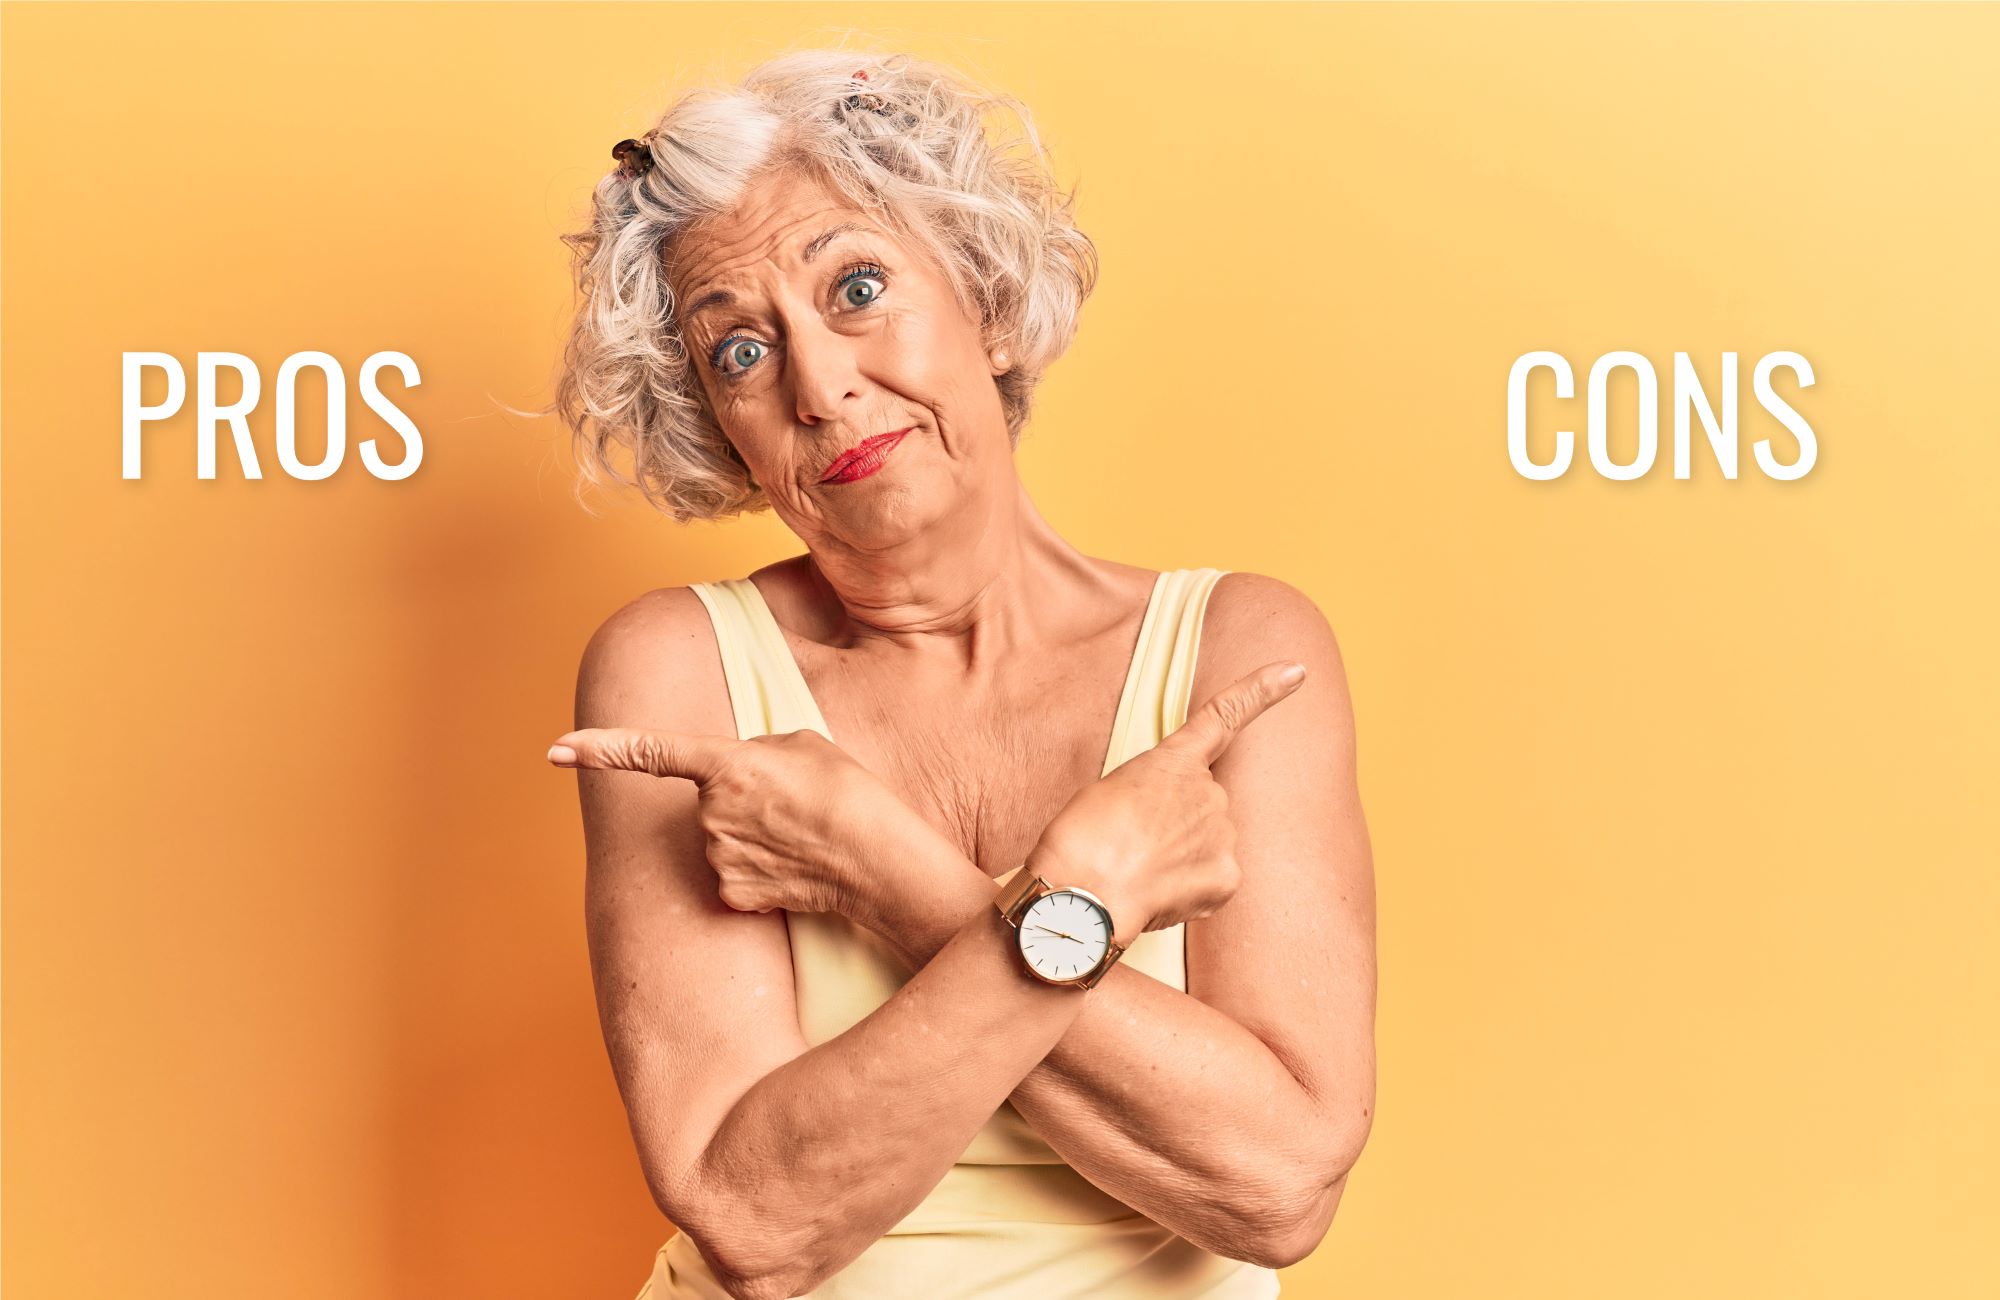 Is A Retirement Community Right For Me? Pros & Cons Of Over 55 Living